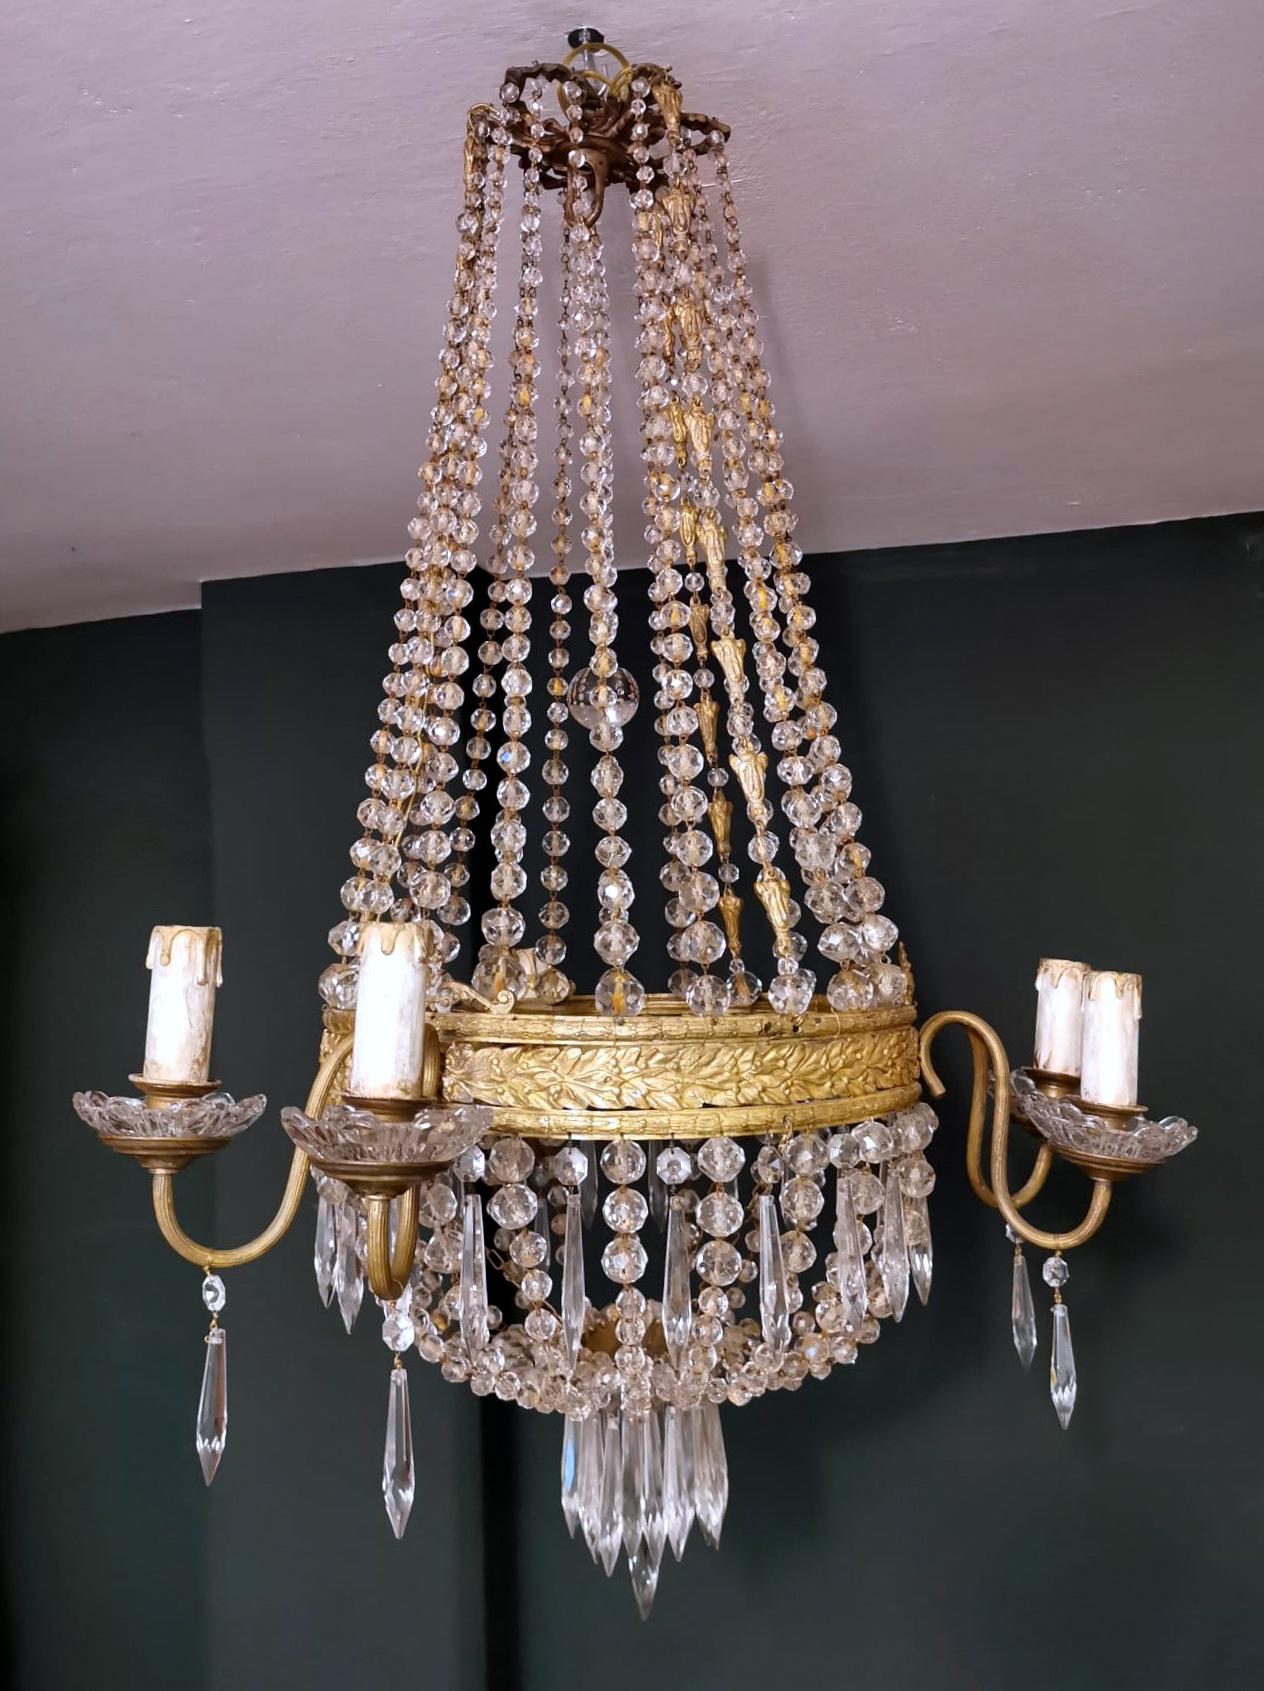 We kindly suggest you read the whole description, because with it we try to give you detailed technical and historical information to guarantee the authenticity of our objects.
The elegant and majestic French chandelier, has the classic balloon